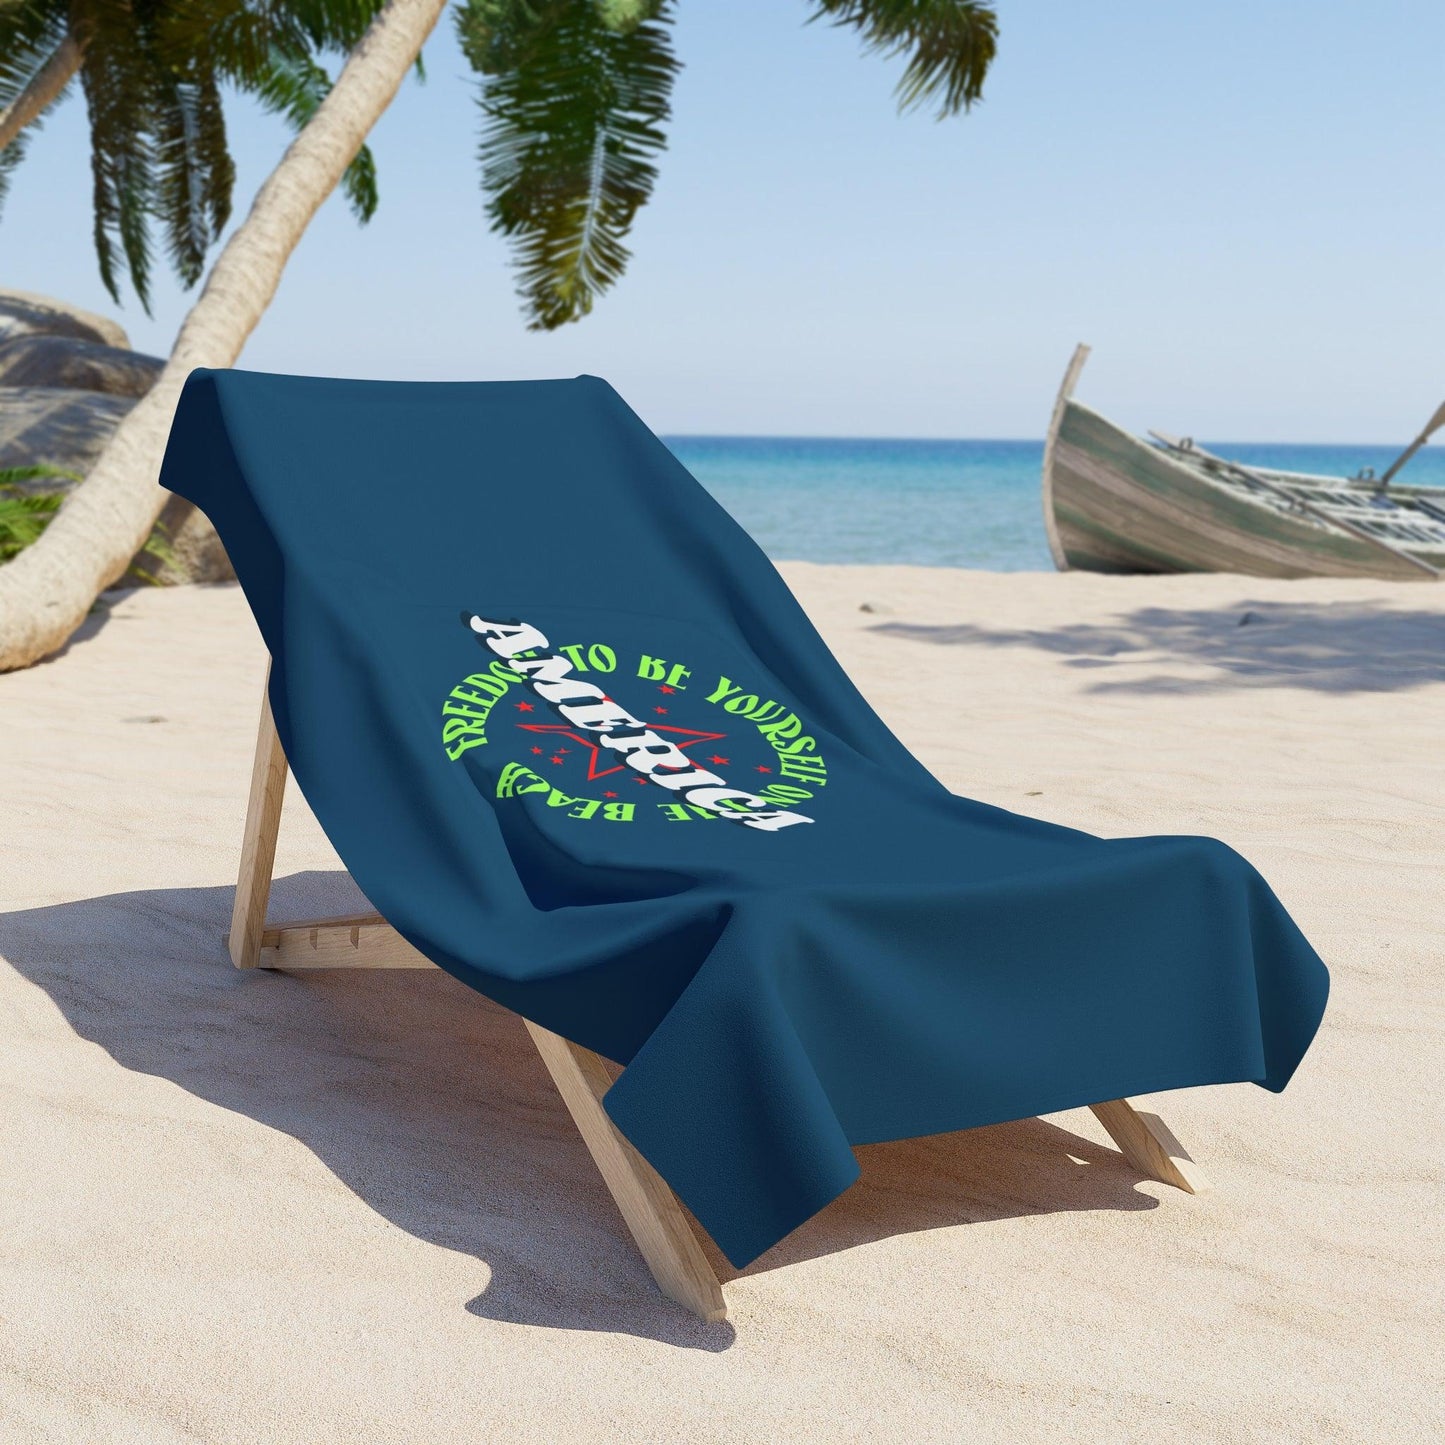 Freedom to be yourself at the Beach, America Beach Towel Wrap - Coastal Collections